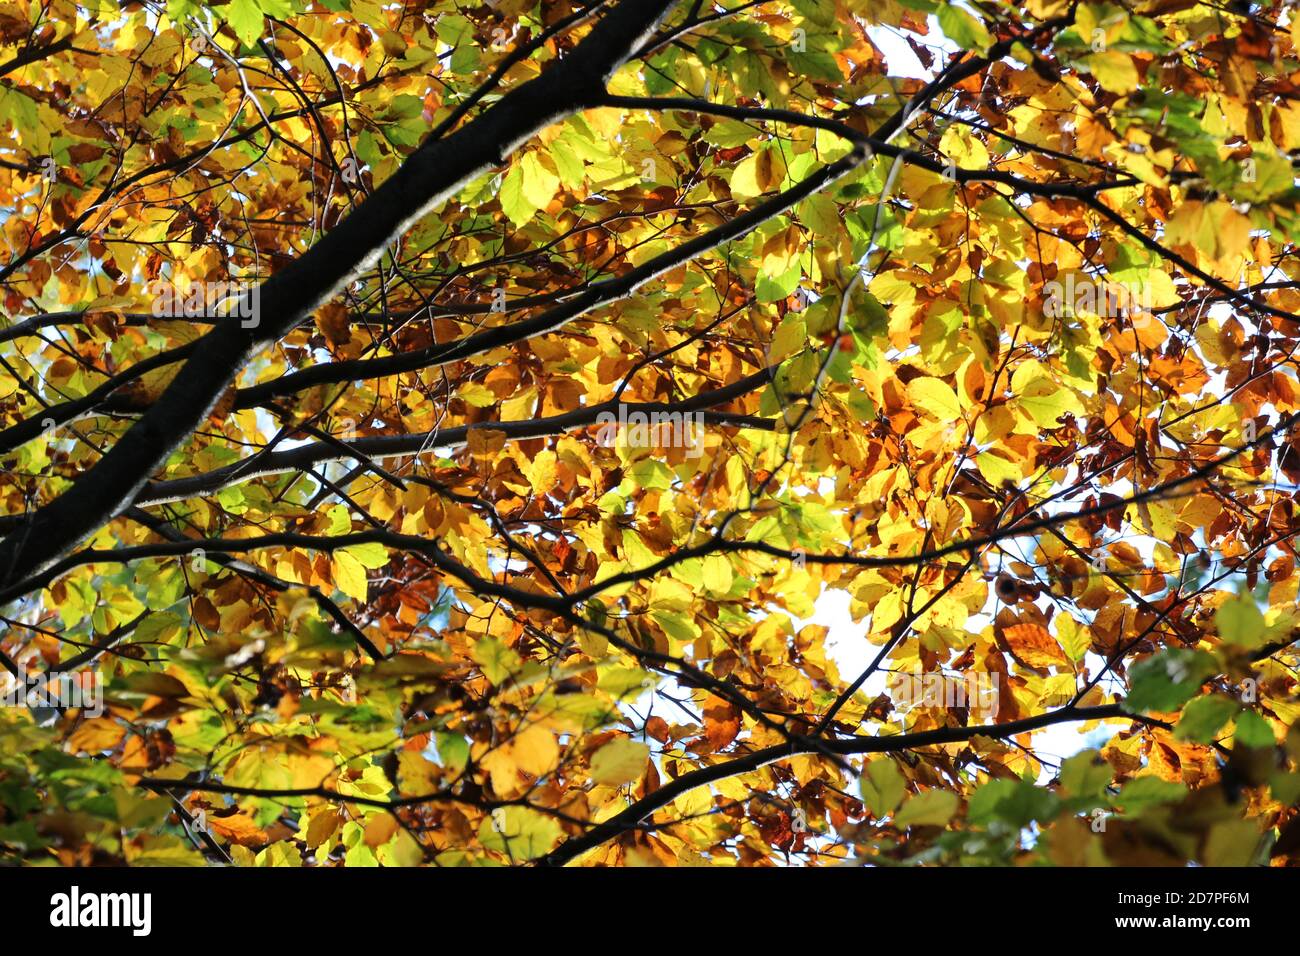 Leaves of the tree in autumn Stock Photo